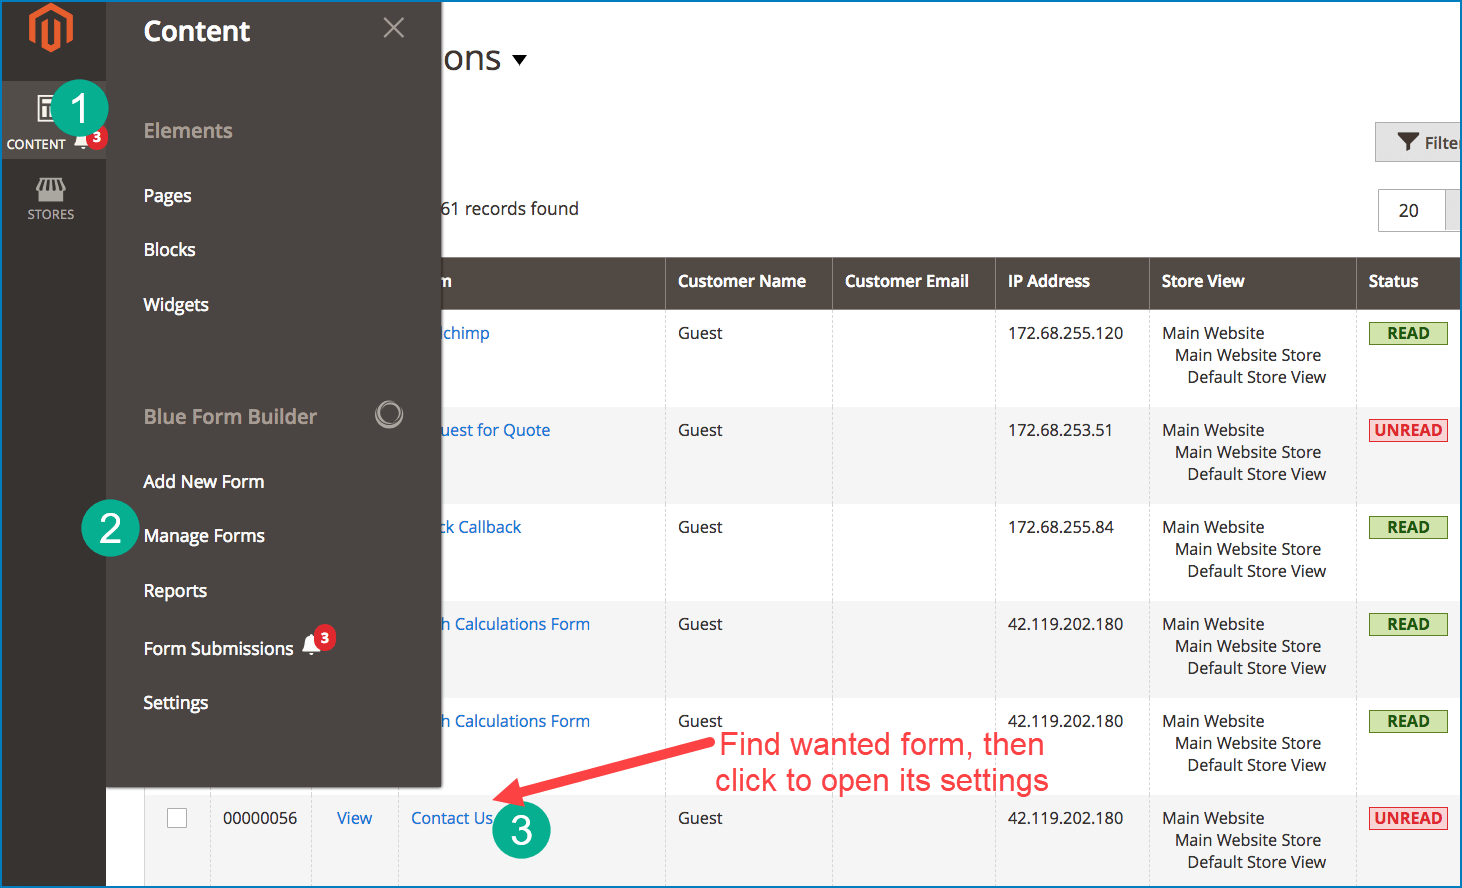 Email notifications to customers _ Open form settings